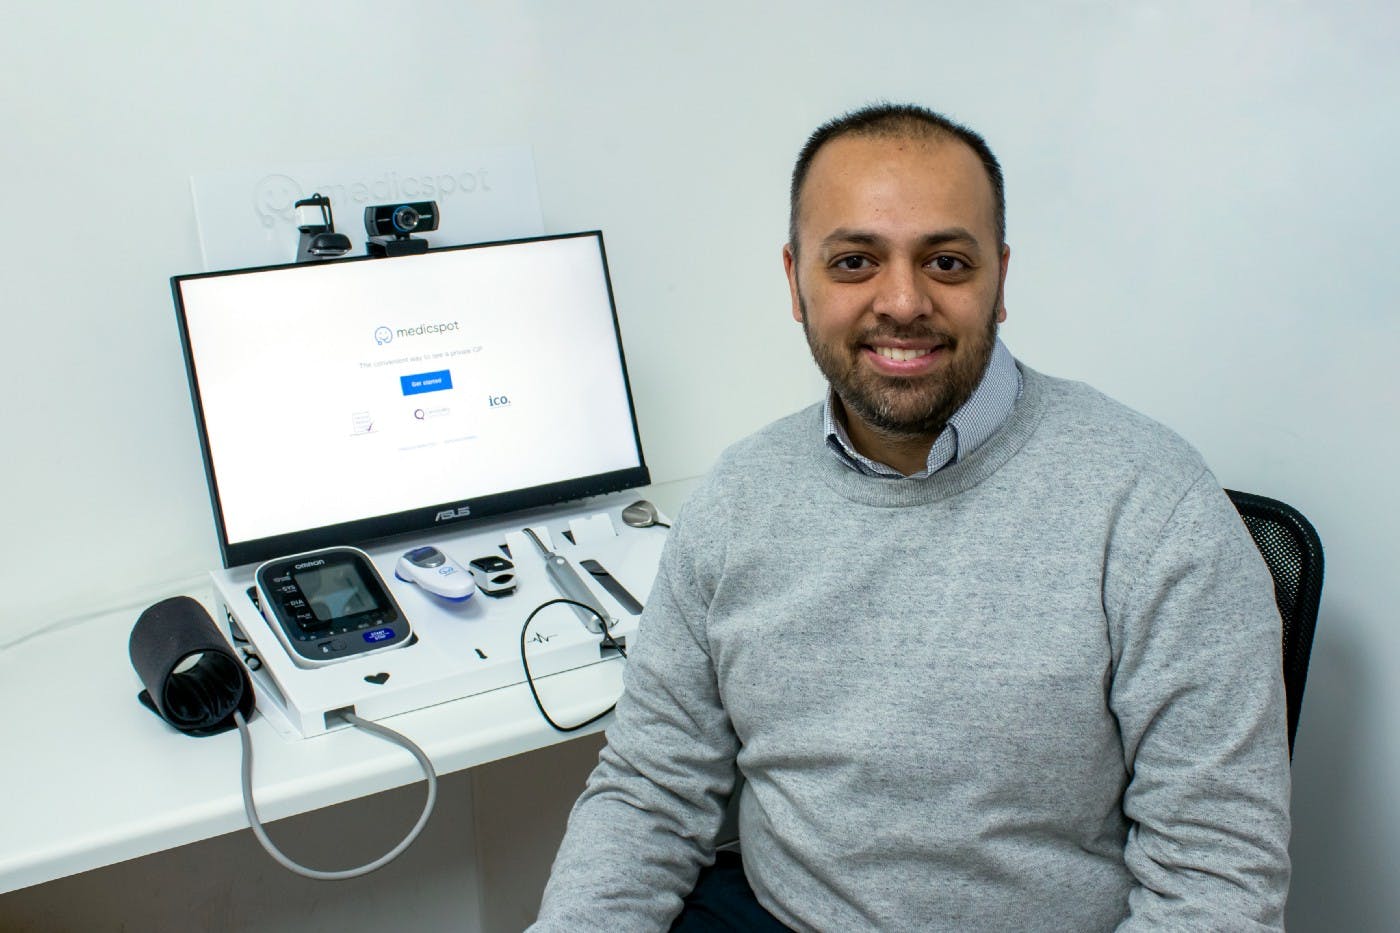 Dr Zubair Ahmed, Co-founder and CEO of Medicspot